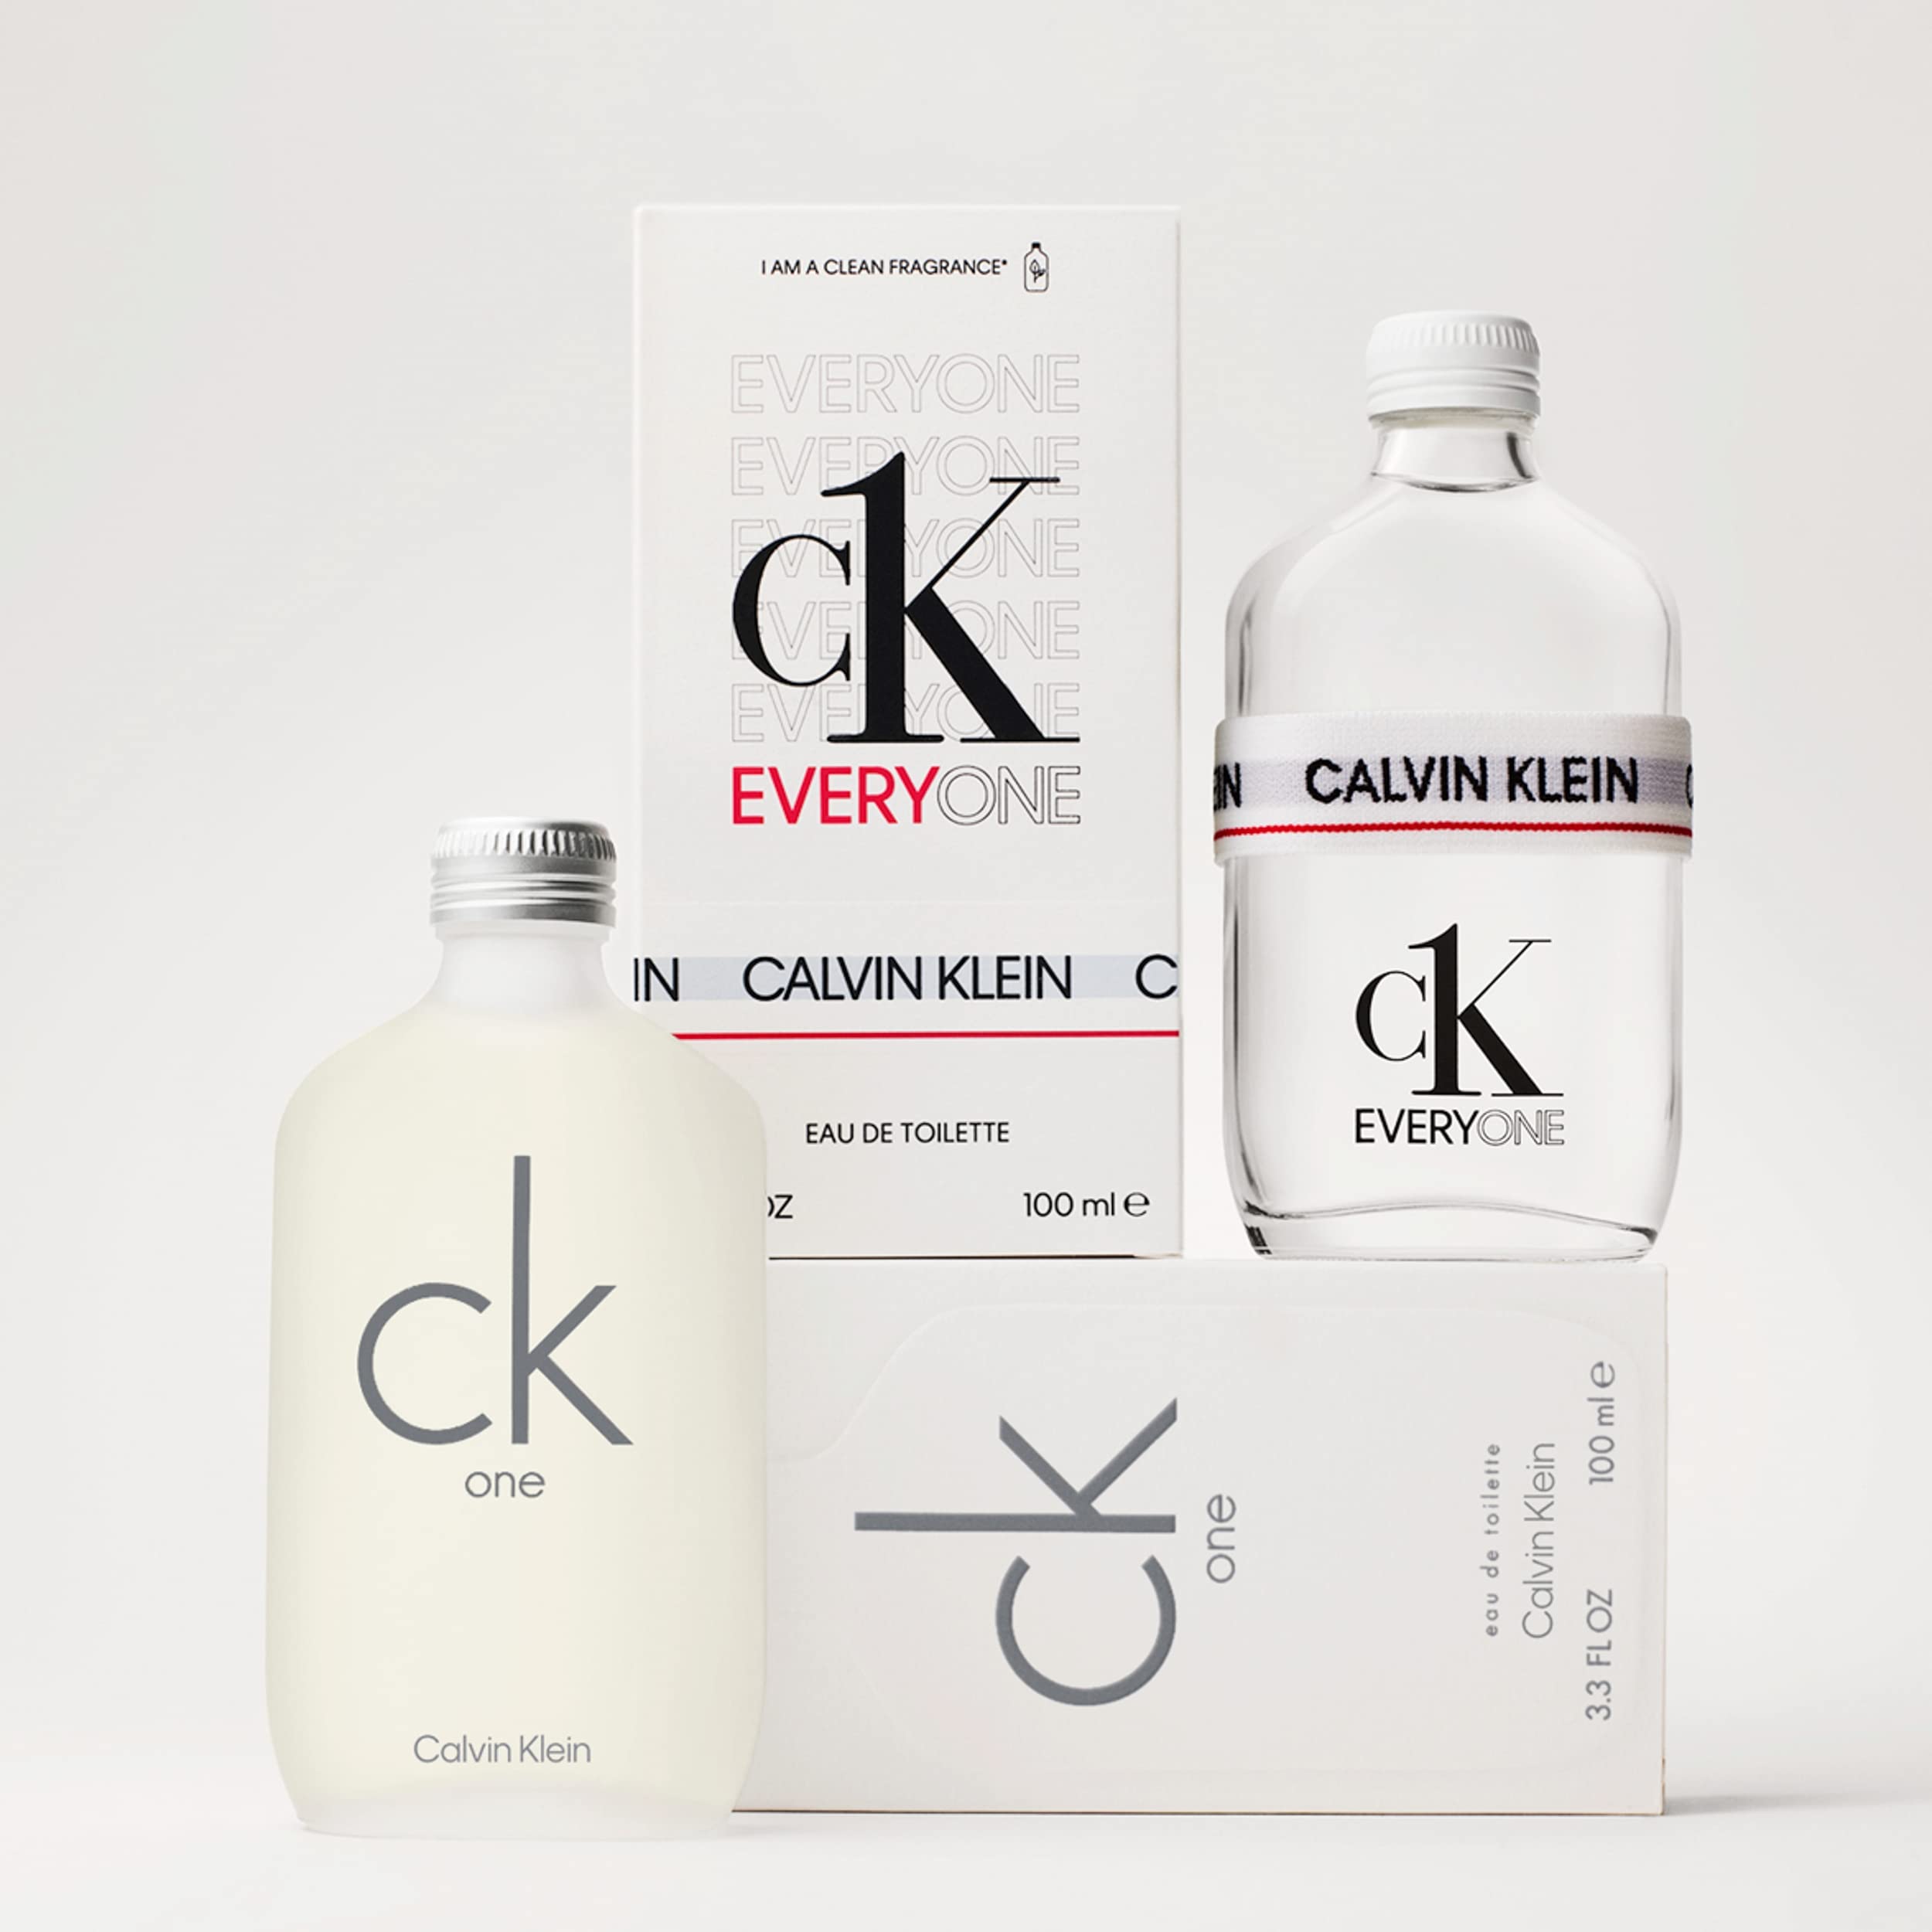 Calvin Klein Ck One for Men - Notes of Green Tea, Rose, Amber and Nature